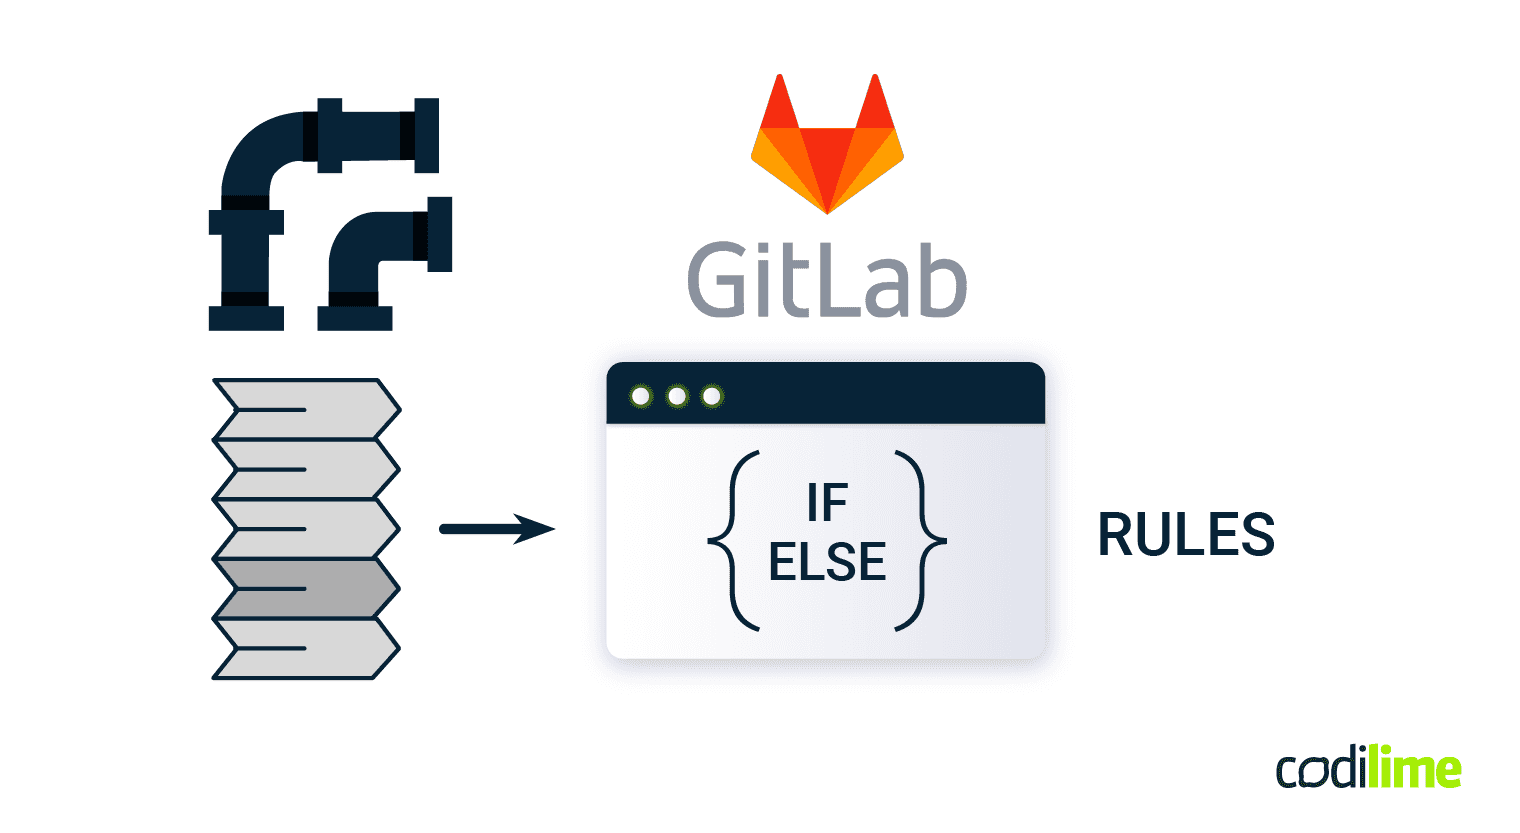 GitLab for version control and CI/CD